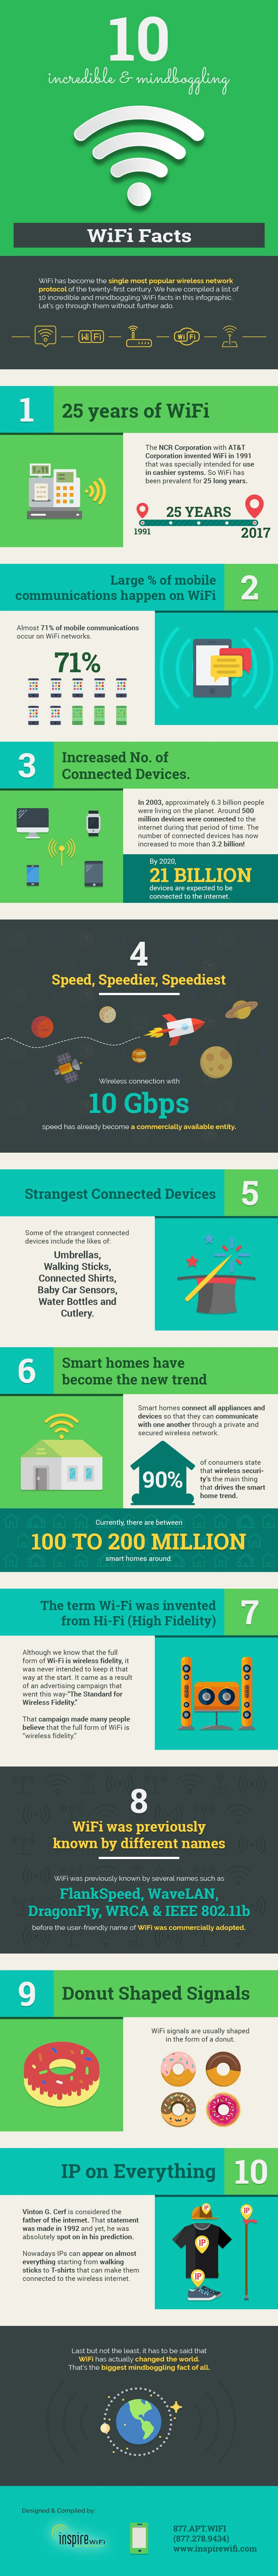 10 Incredible & Mind boggling WiFi Facts - #infographic